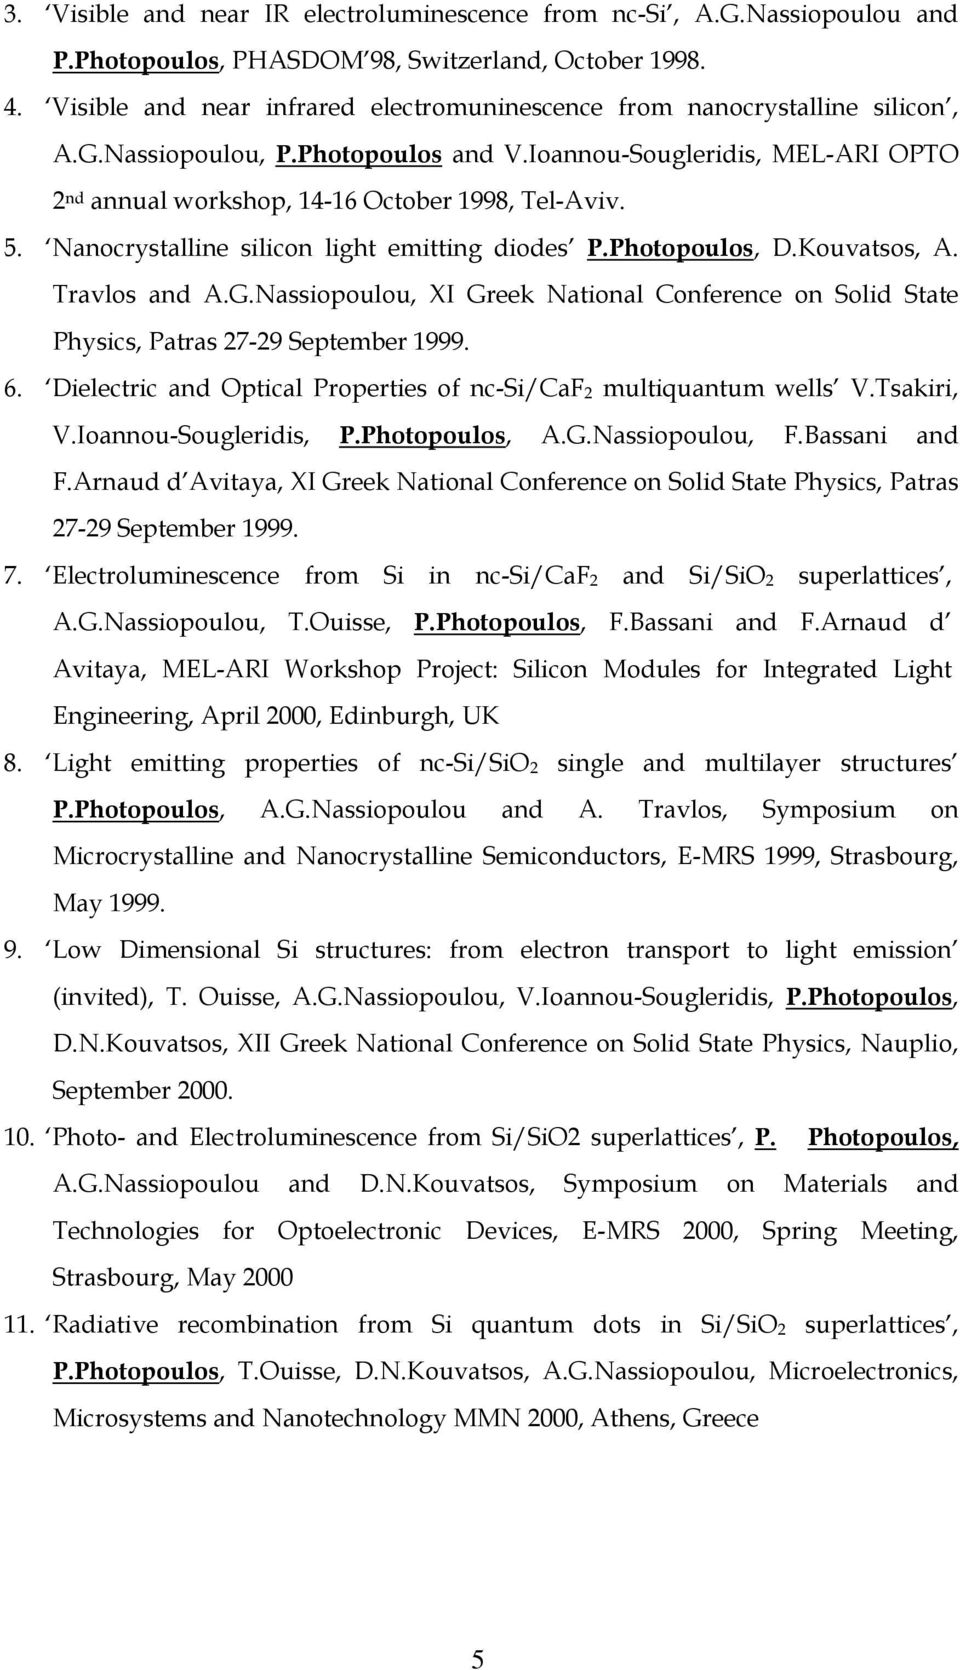 5. Nanocrystalline silicon light emitting diodes P.Photopoulos, D.Kouvatsos, A. Travlos and A.G.Nassiopoulou, XI Greek National Conference on Solid State Physics, Patras 27-29 September 1999. 6.